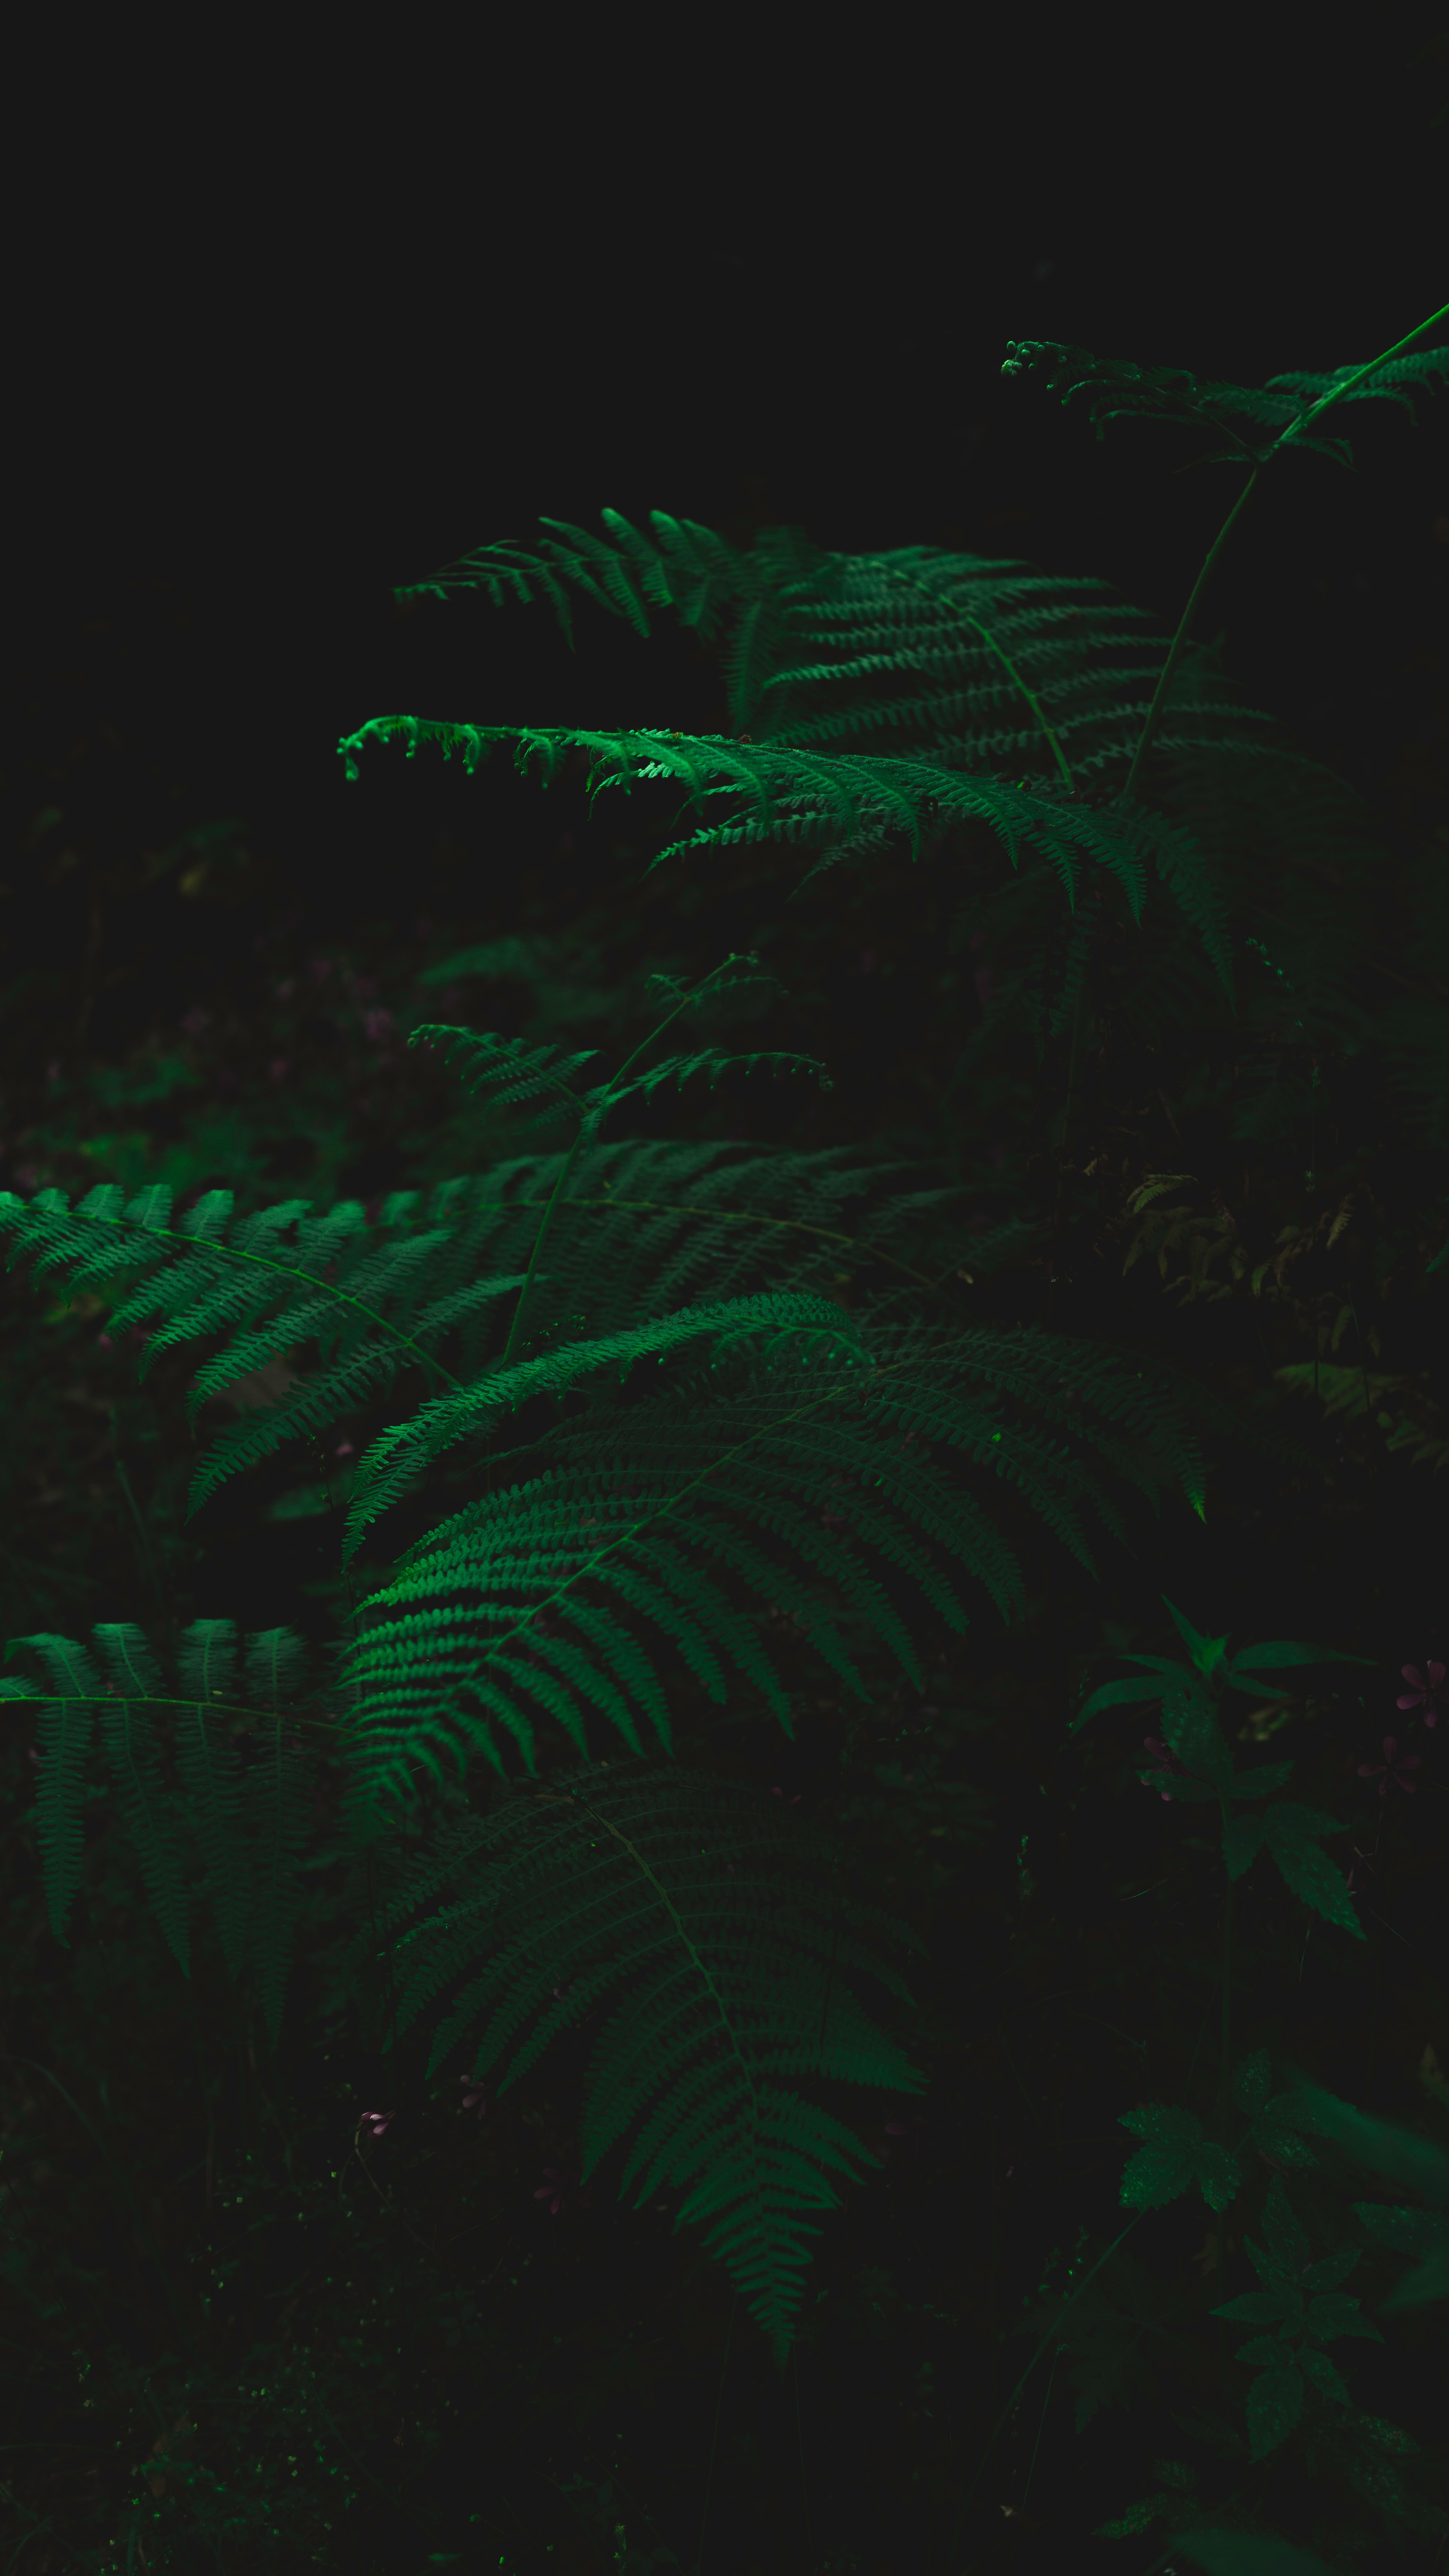 103296 download wallpaper leaves, green, plant, dark, fern screensavers and pictures for free